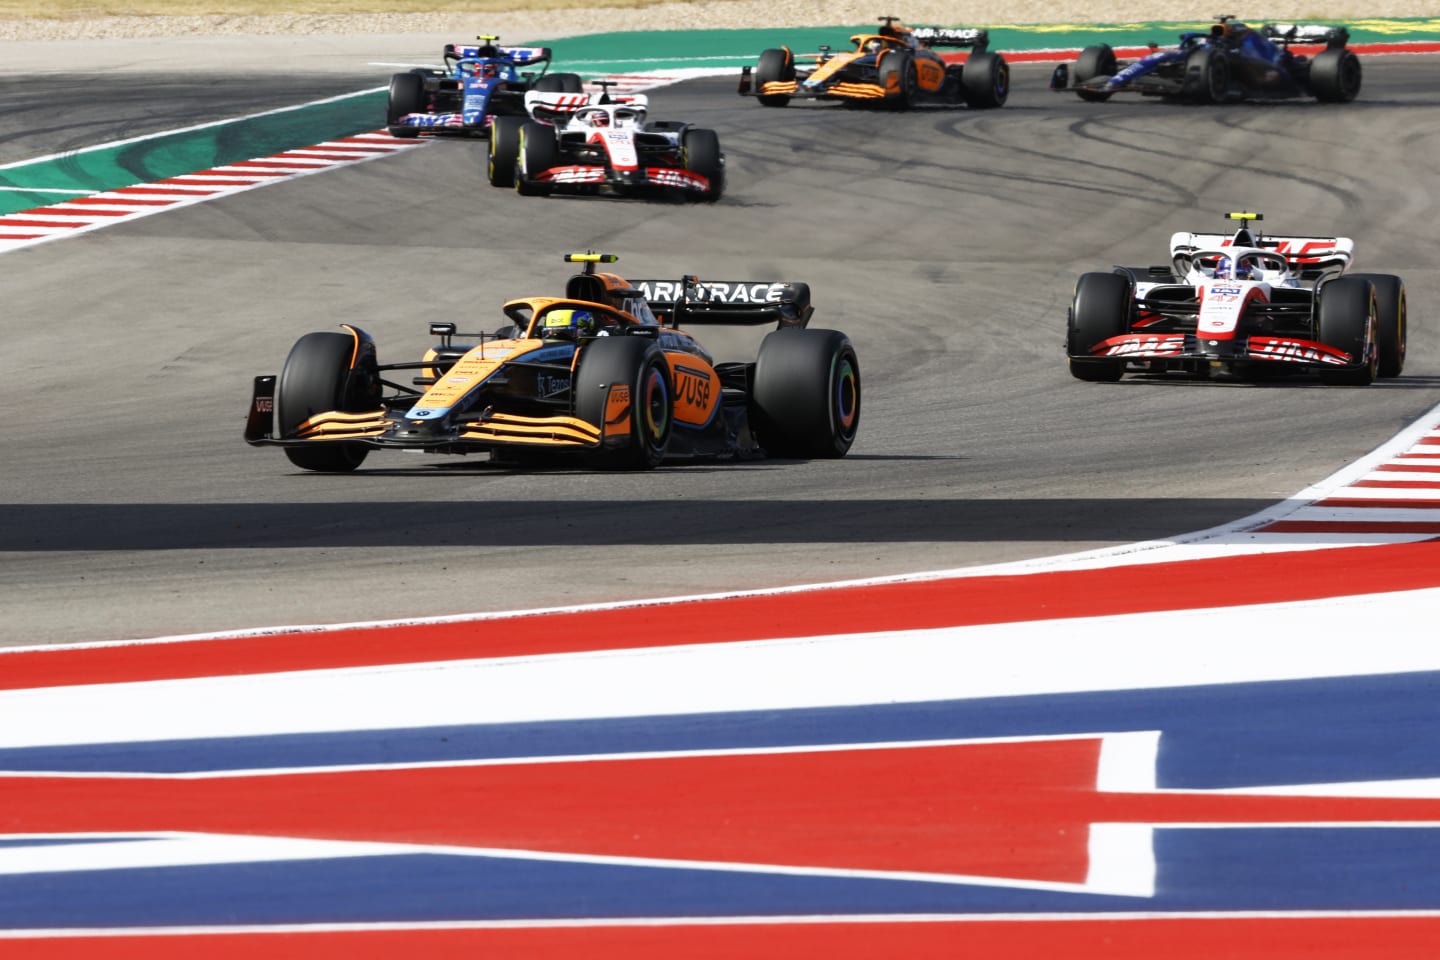 AUSTIN, TEXAS - OCTOBER 23: Lando Norris of Great Britain driving the (4) McLaren MCL36 Mercedes leads Mick Schumacher of Germany driving the (47) Haas F1 VF-22 Ferrari on track during the F1 Grand Prix of USA at Circuit of The Americas on October 23, 2022 in Austin, Texas. (Photo by Chris Graythen/Getty Images)